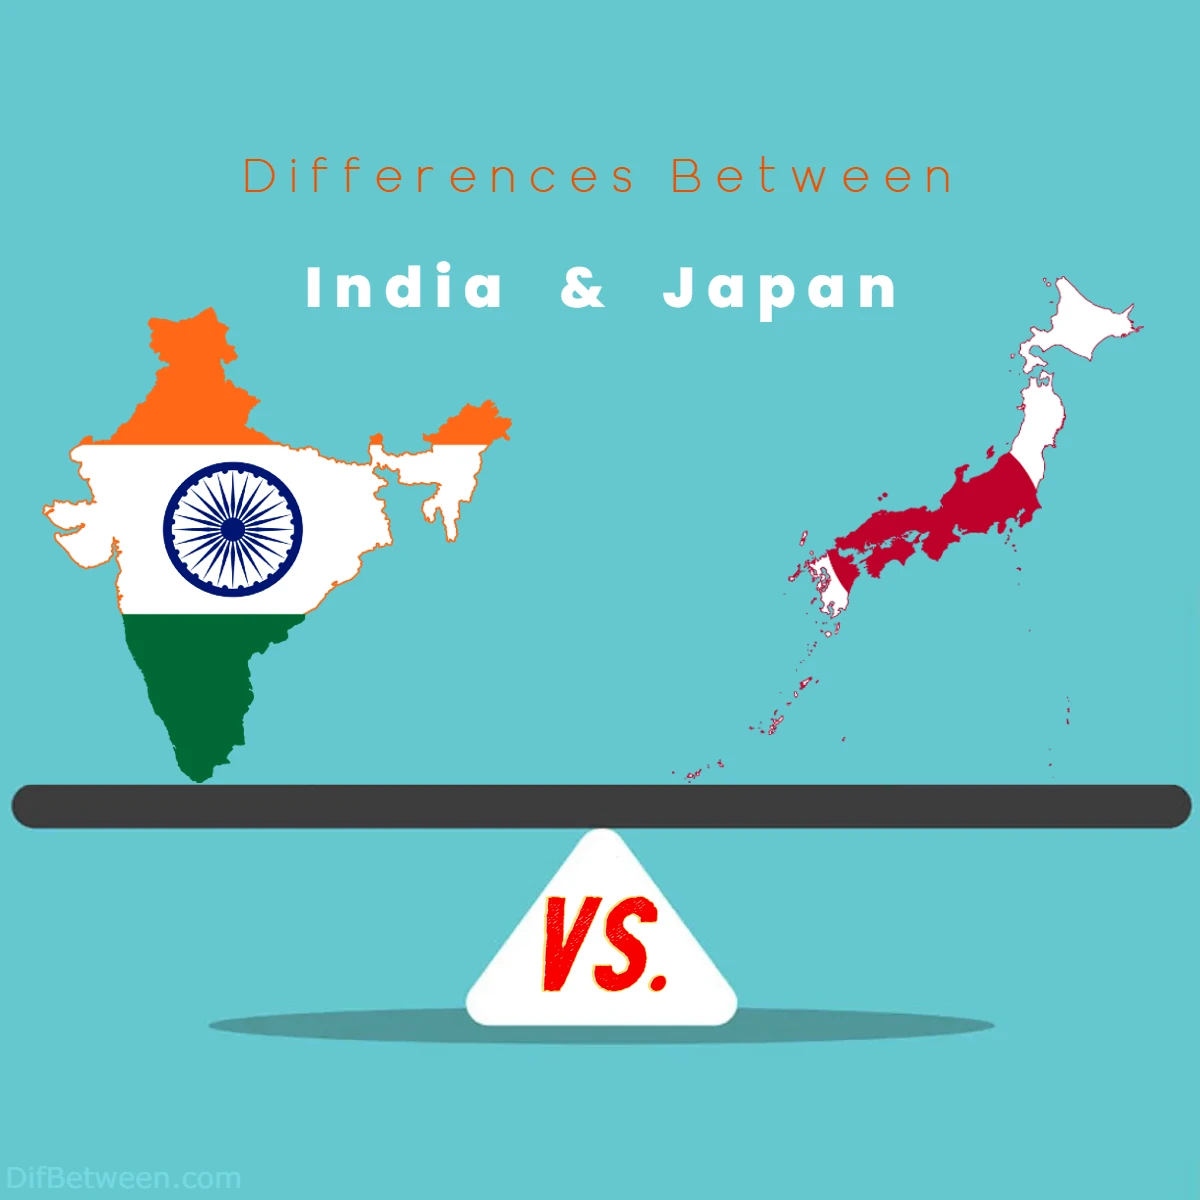 Differences Between India vs Japan